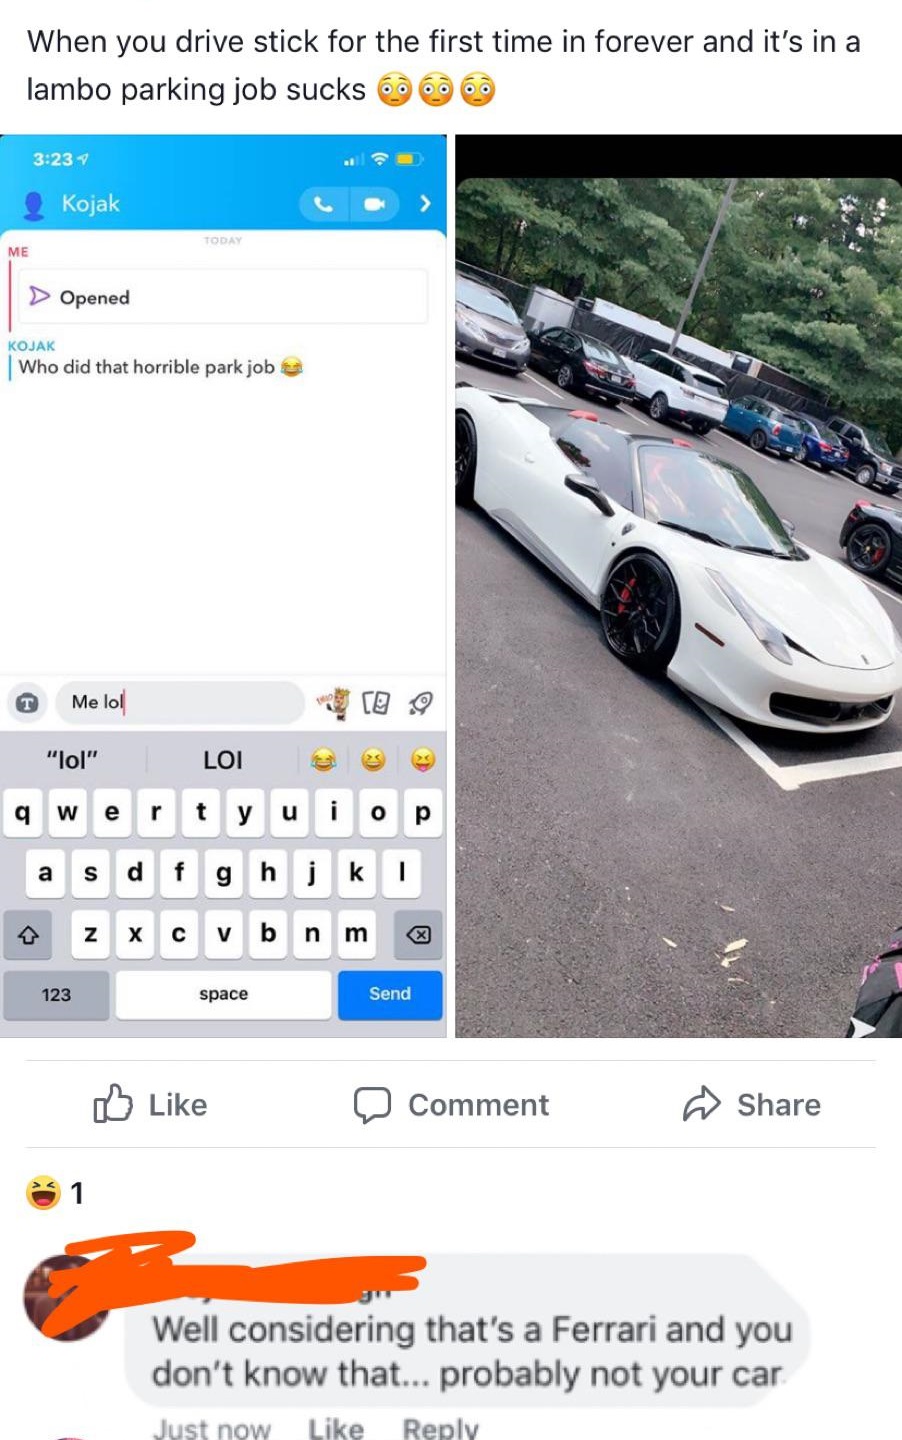 vehicle door - When you drive stick for the first time in forever and it's in a lambo parking job sucks 666 Kojak Today Me > Opened Kojak Who did that horrible park job Me lol "lo" Loi es 2 a s d f g h i kl 123 space Send 0 Comment @ Well considering that